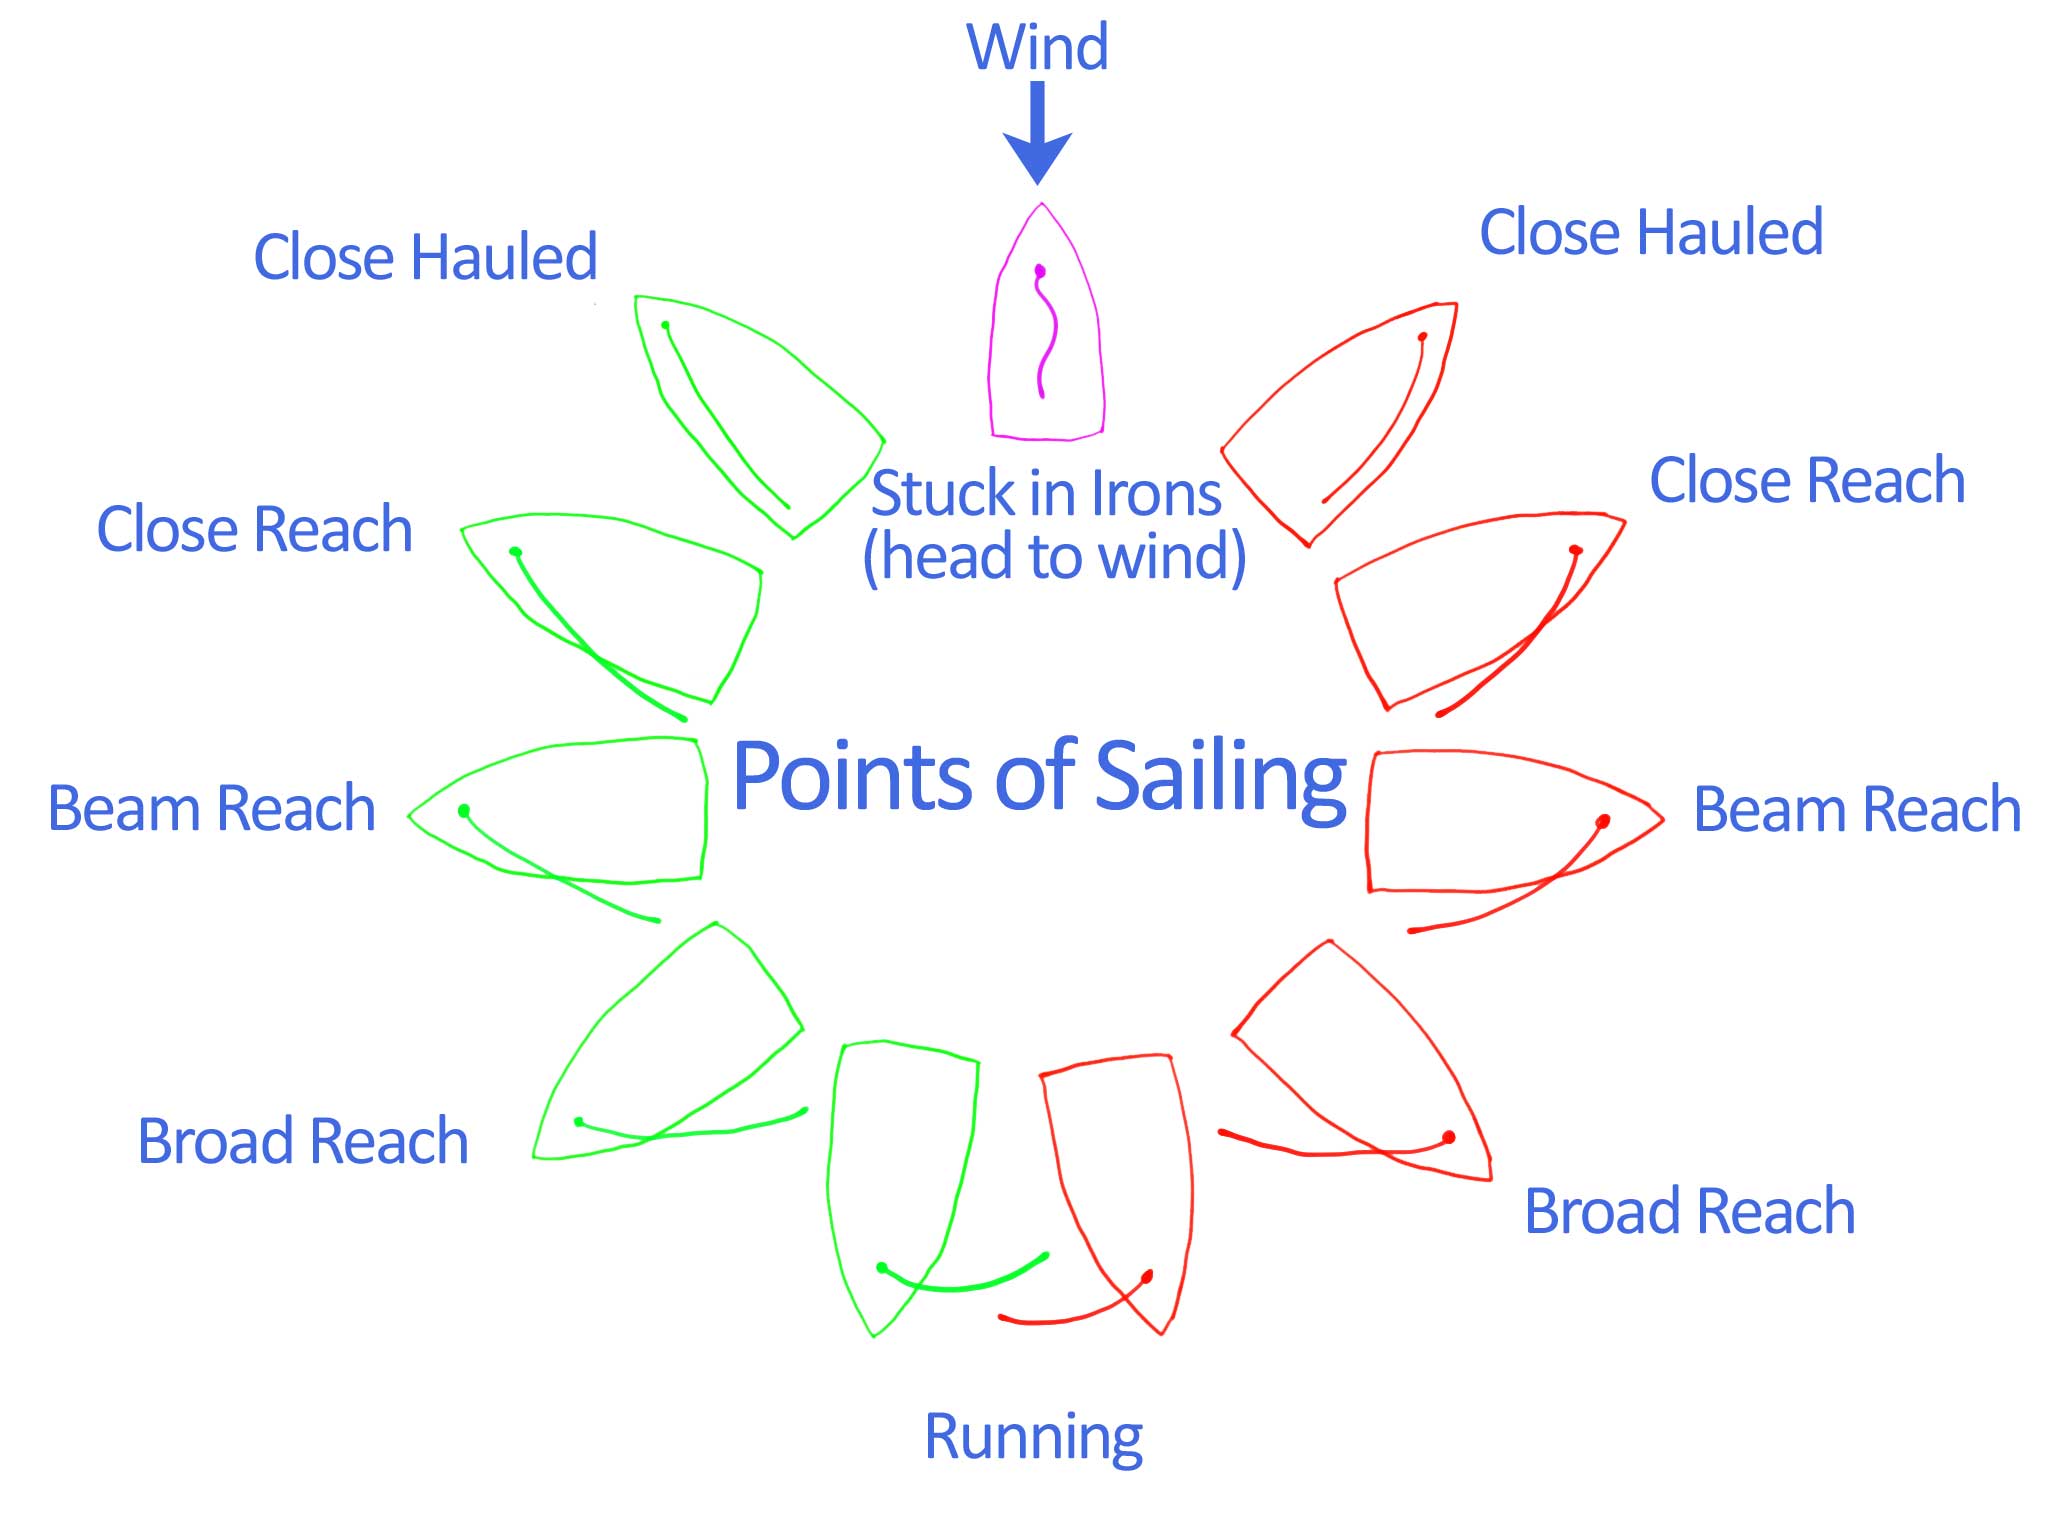 Points of Sailing